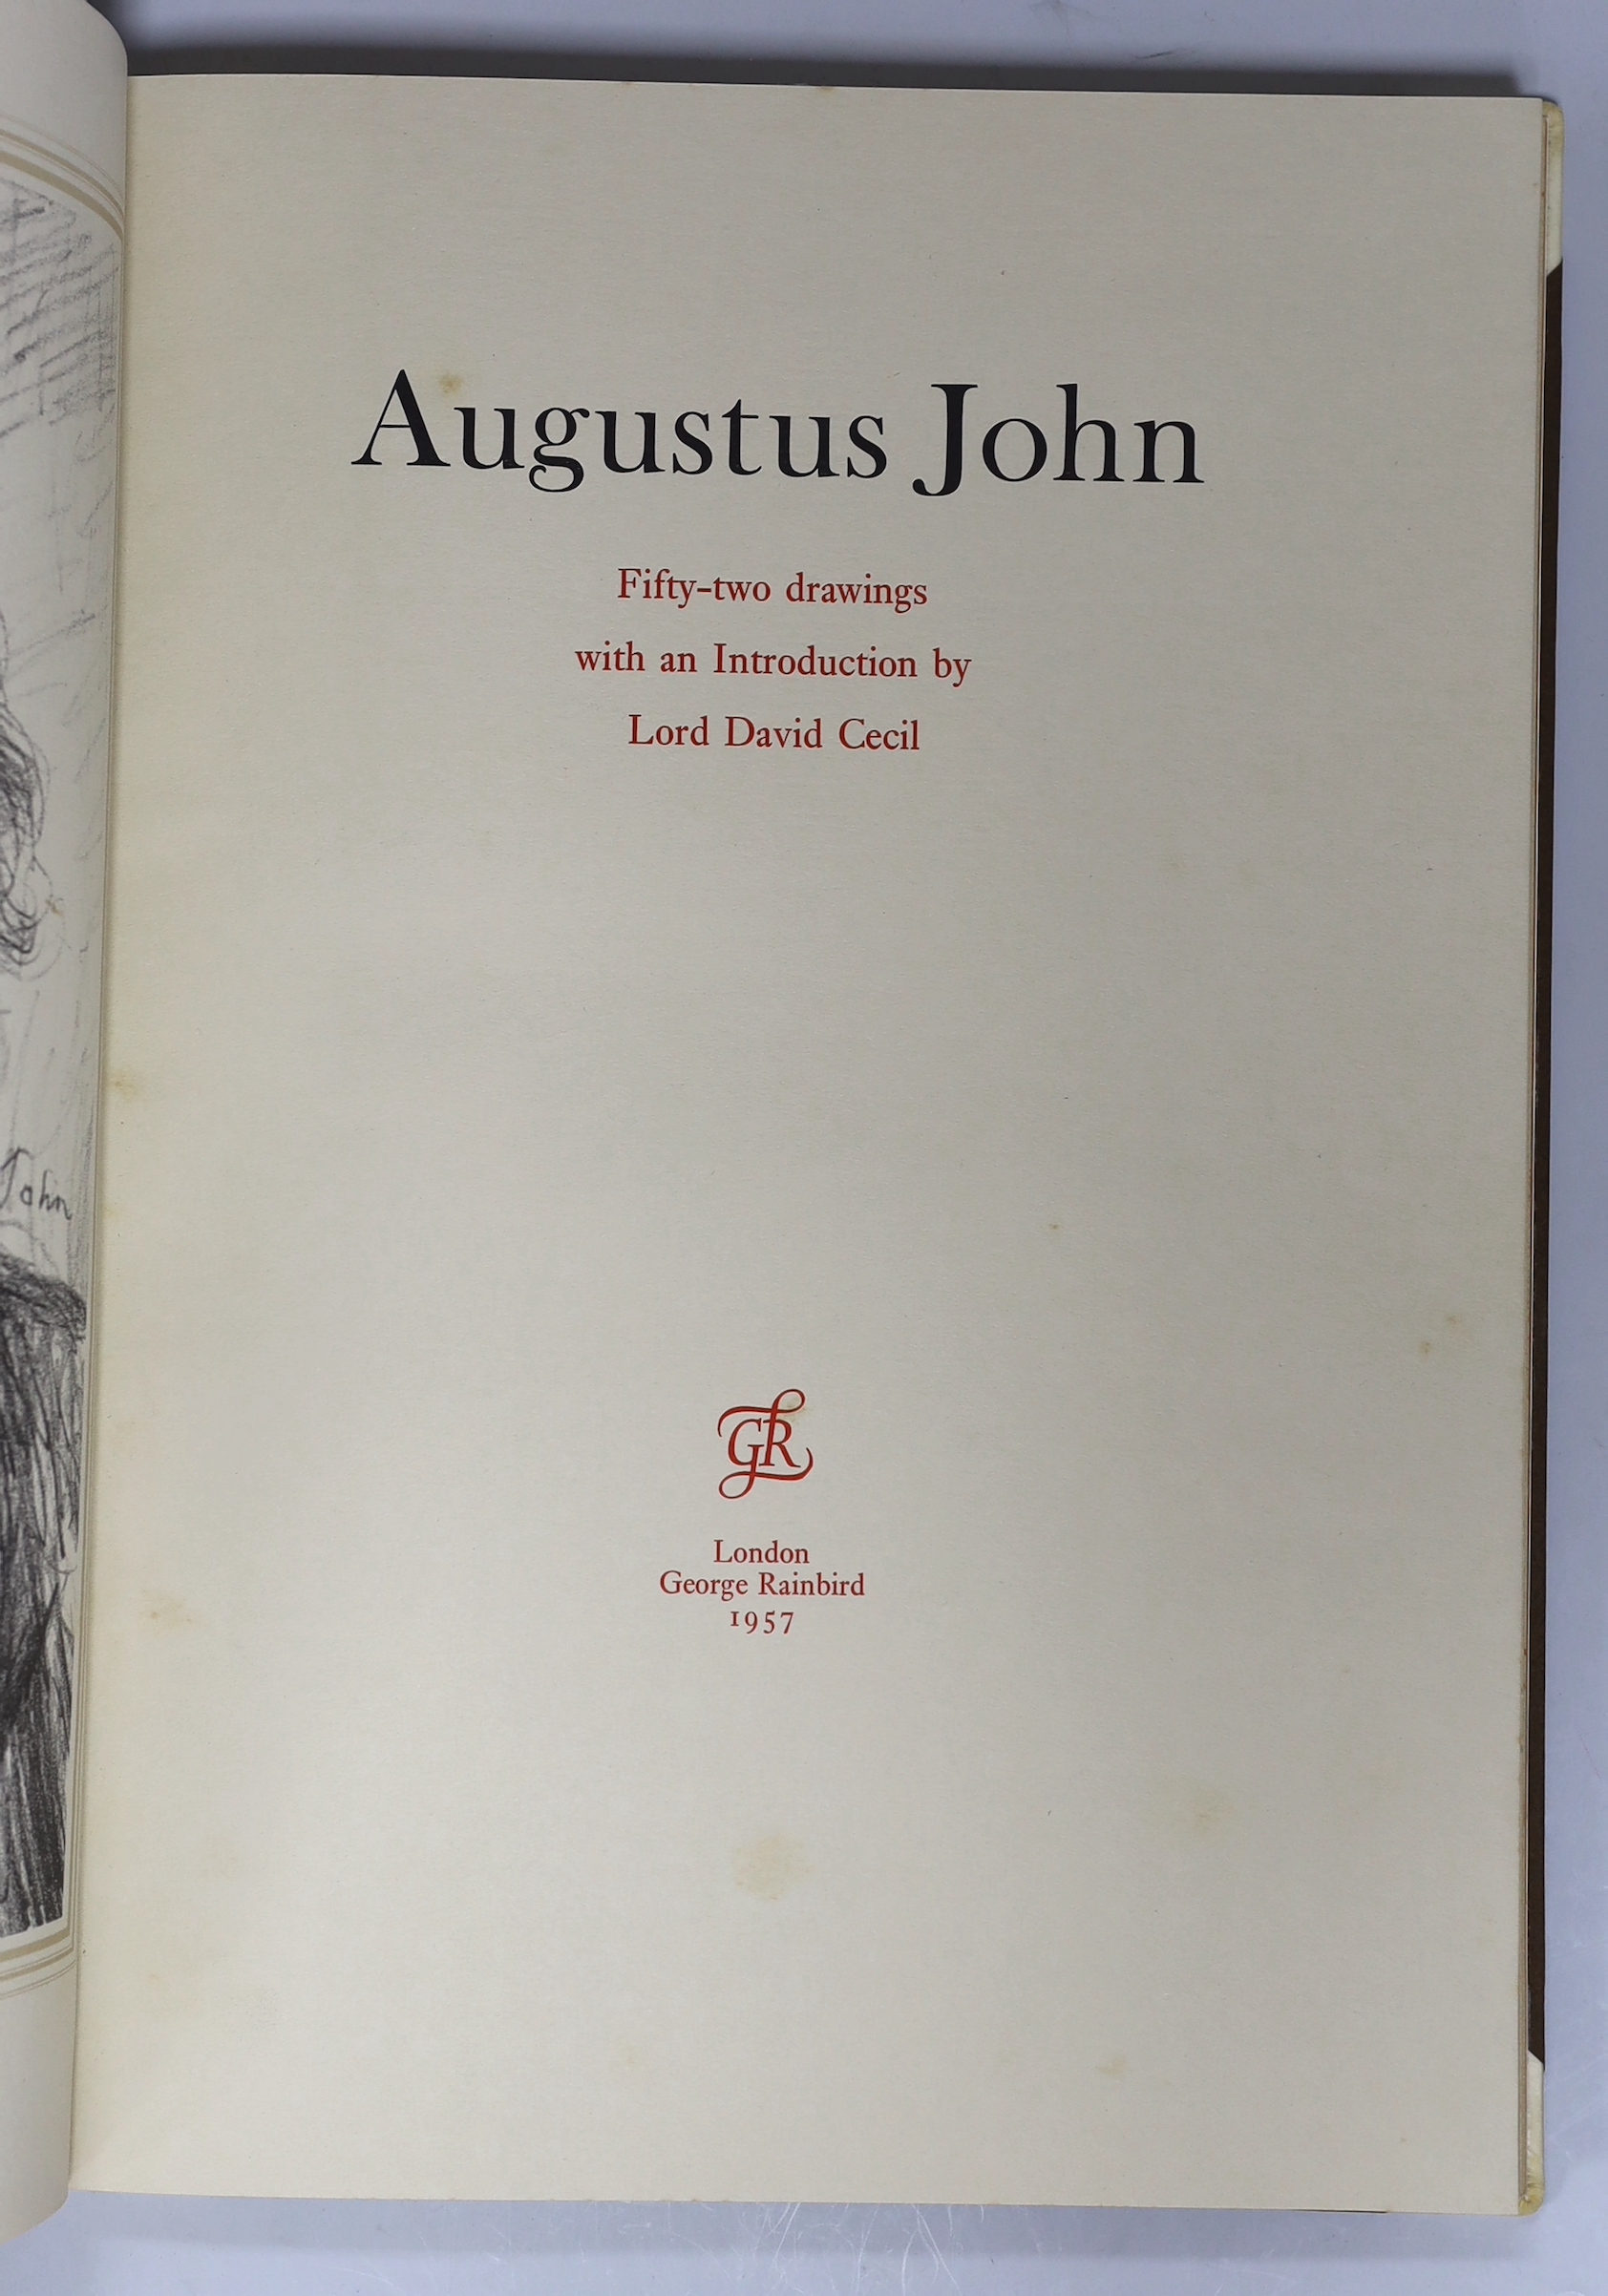 John, Augustus - Fifty-Two Drawings, with an introduction by Lord David Cecil, one of 150 signed by Augustus John and David Cecil, folio, photo-litho offset plates, original half vellum by Zaehnsdorf, George Rainsford, L